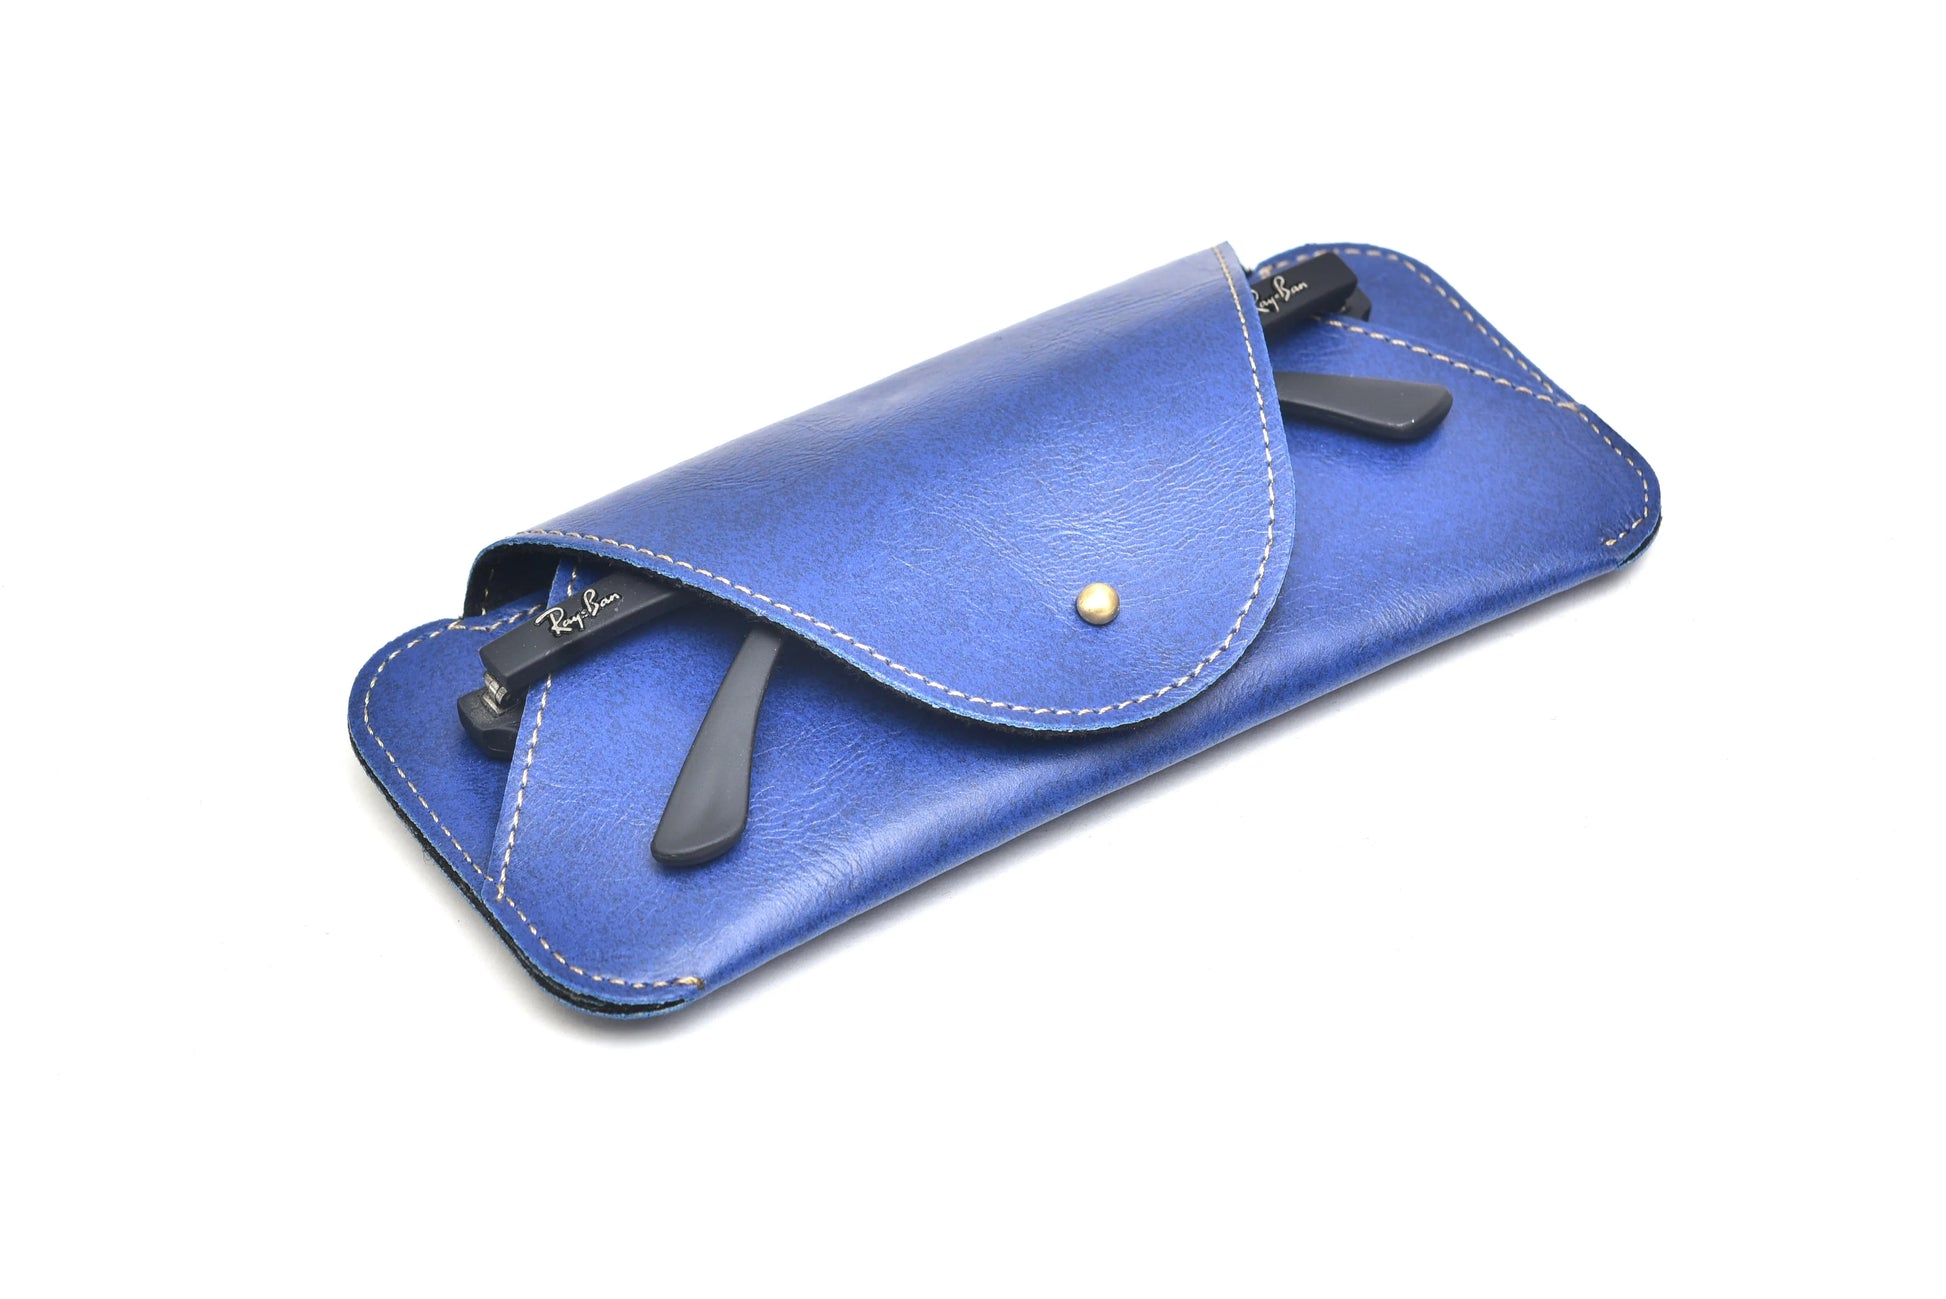 This eyewear case is tailor-made to fit your specific eyewear dimensions, ensuring a snug and secure fit. back view